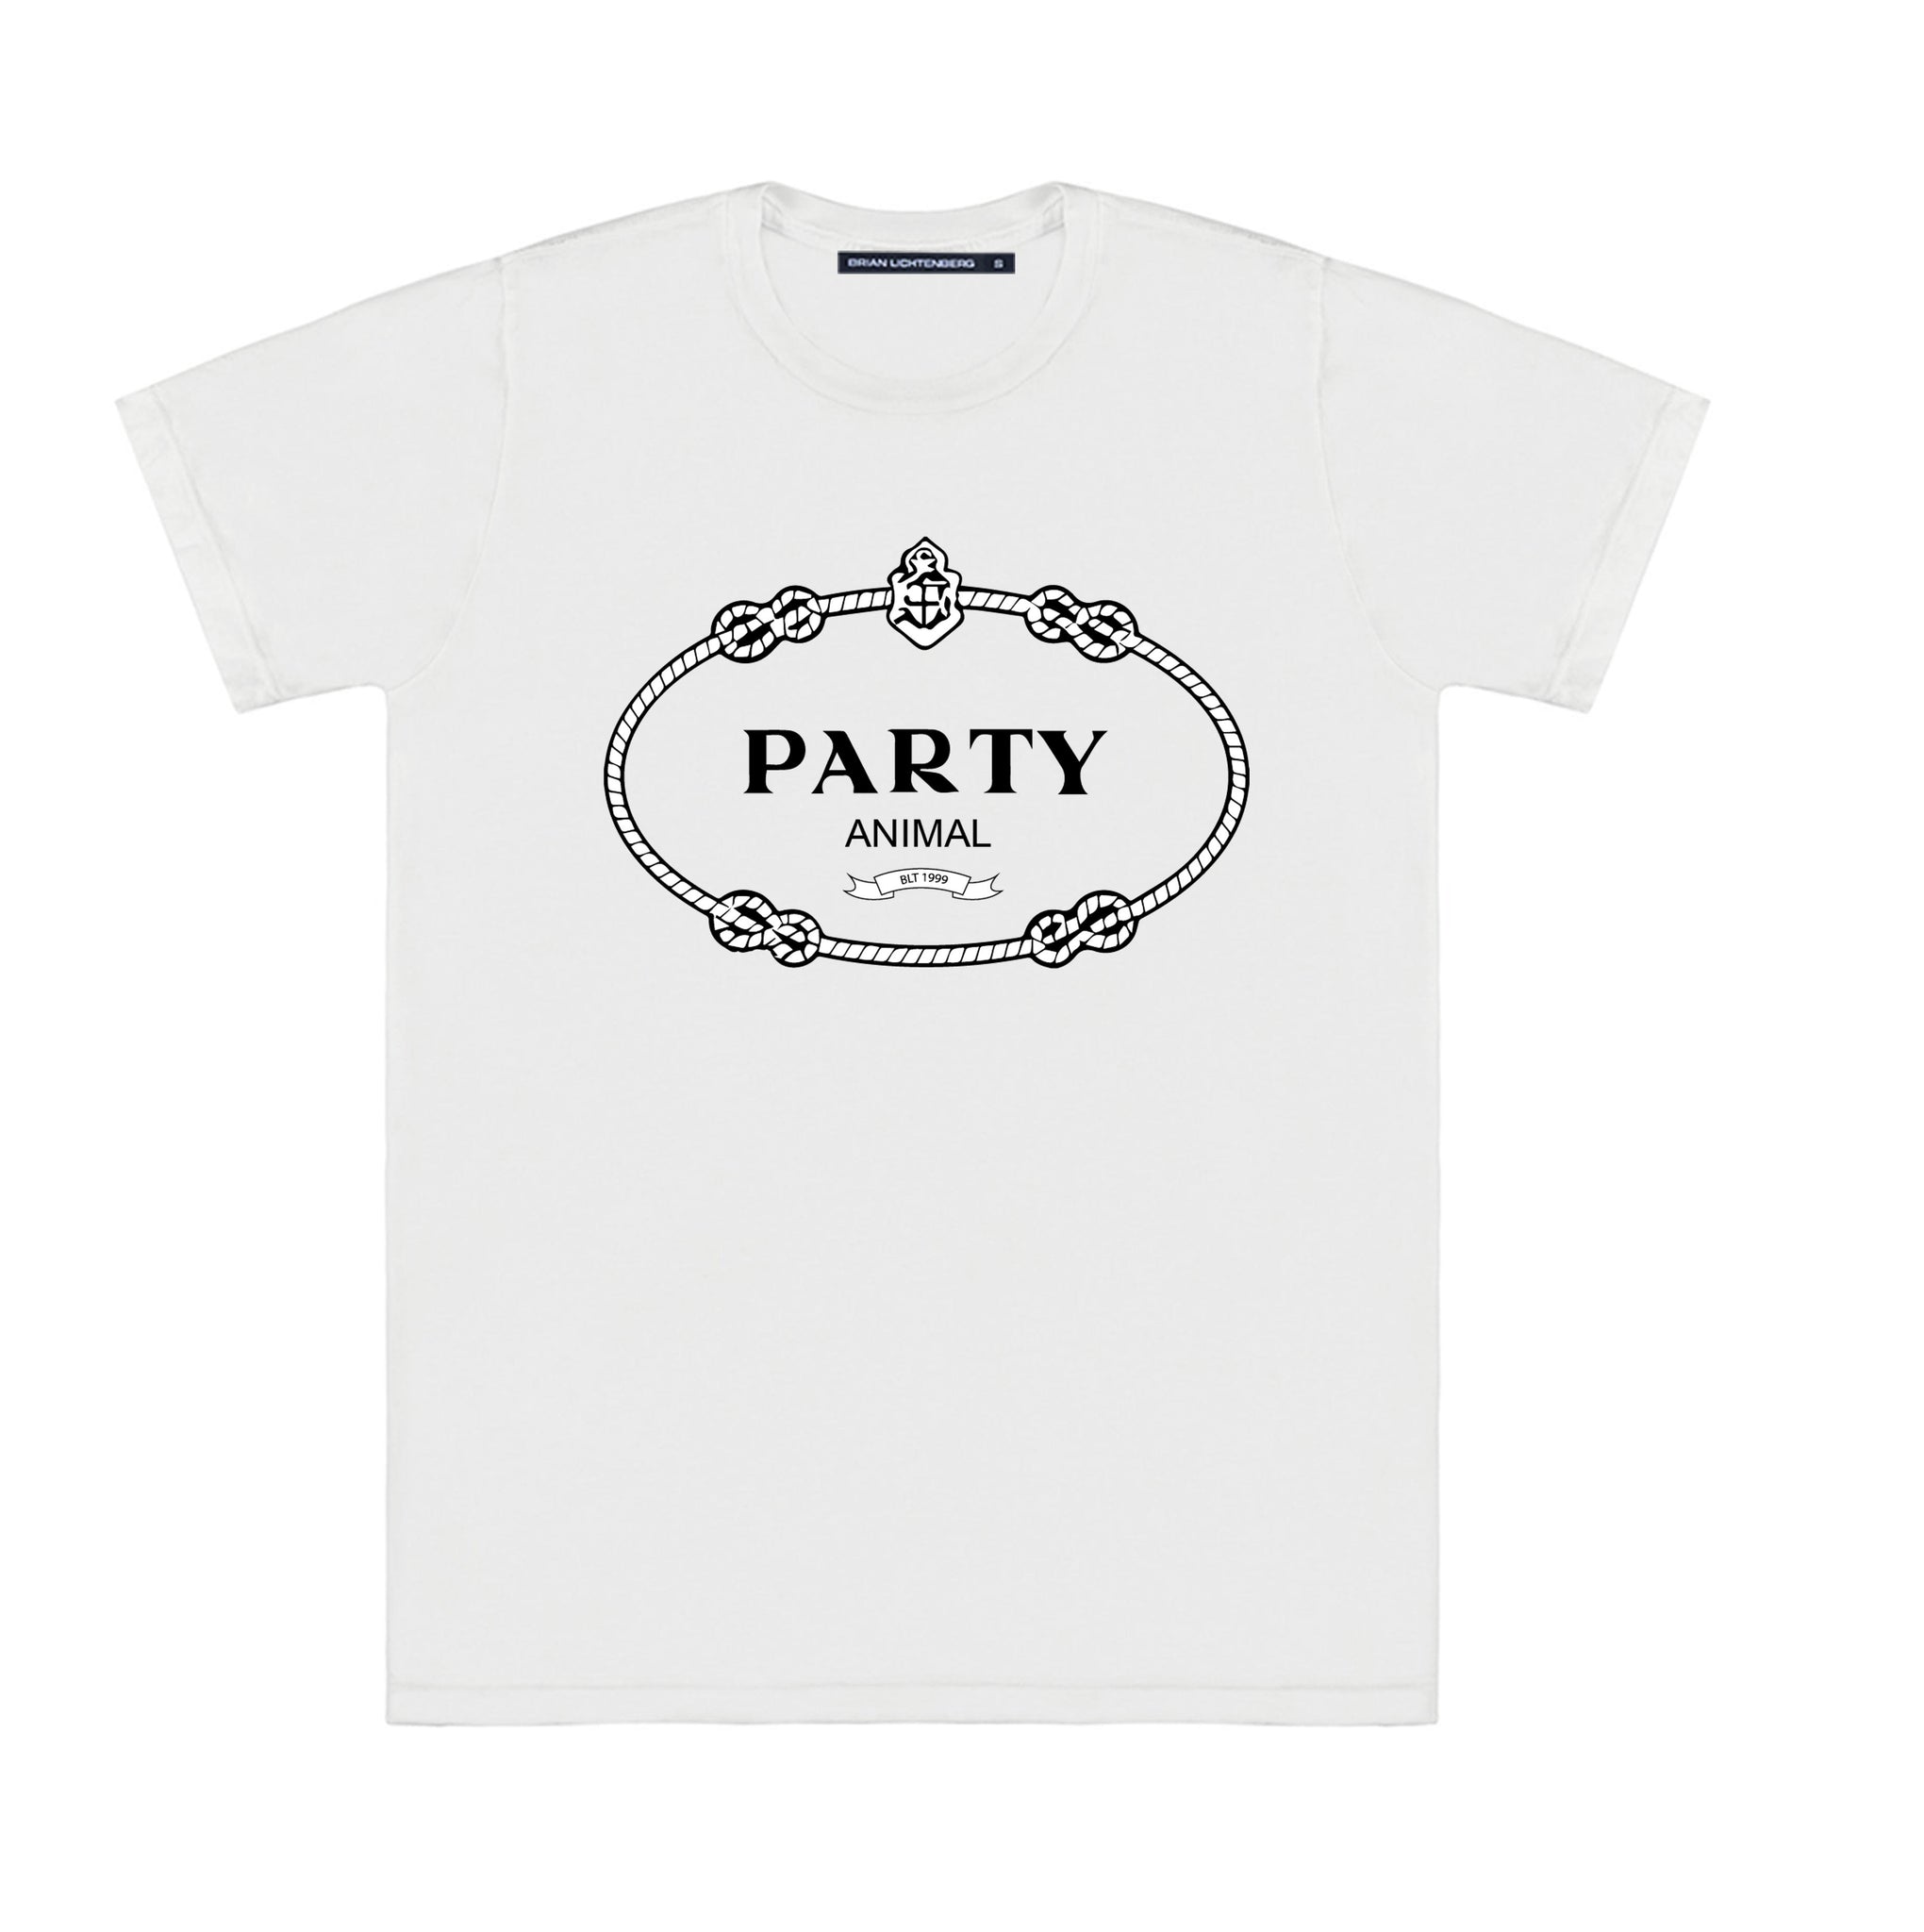 PARTY ANIMAL TEE